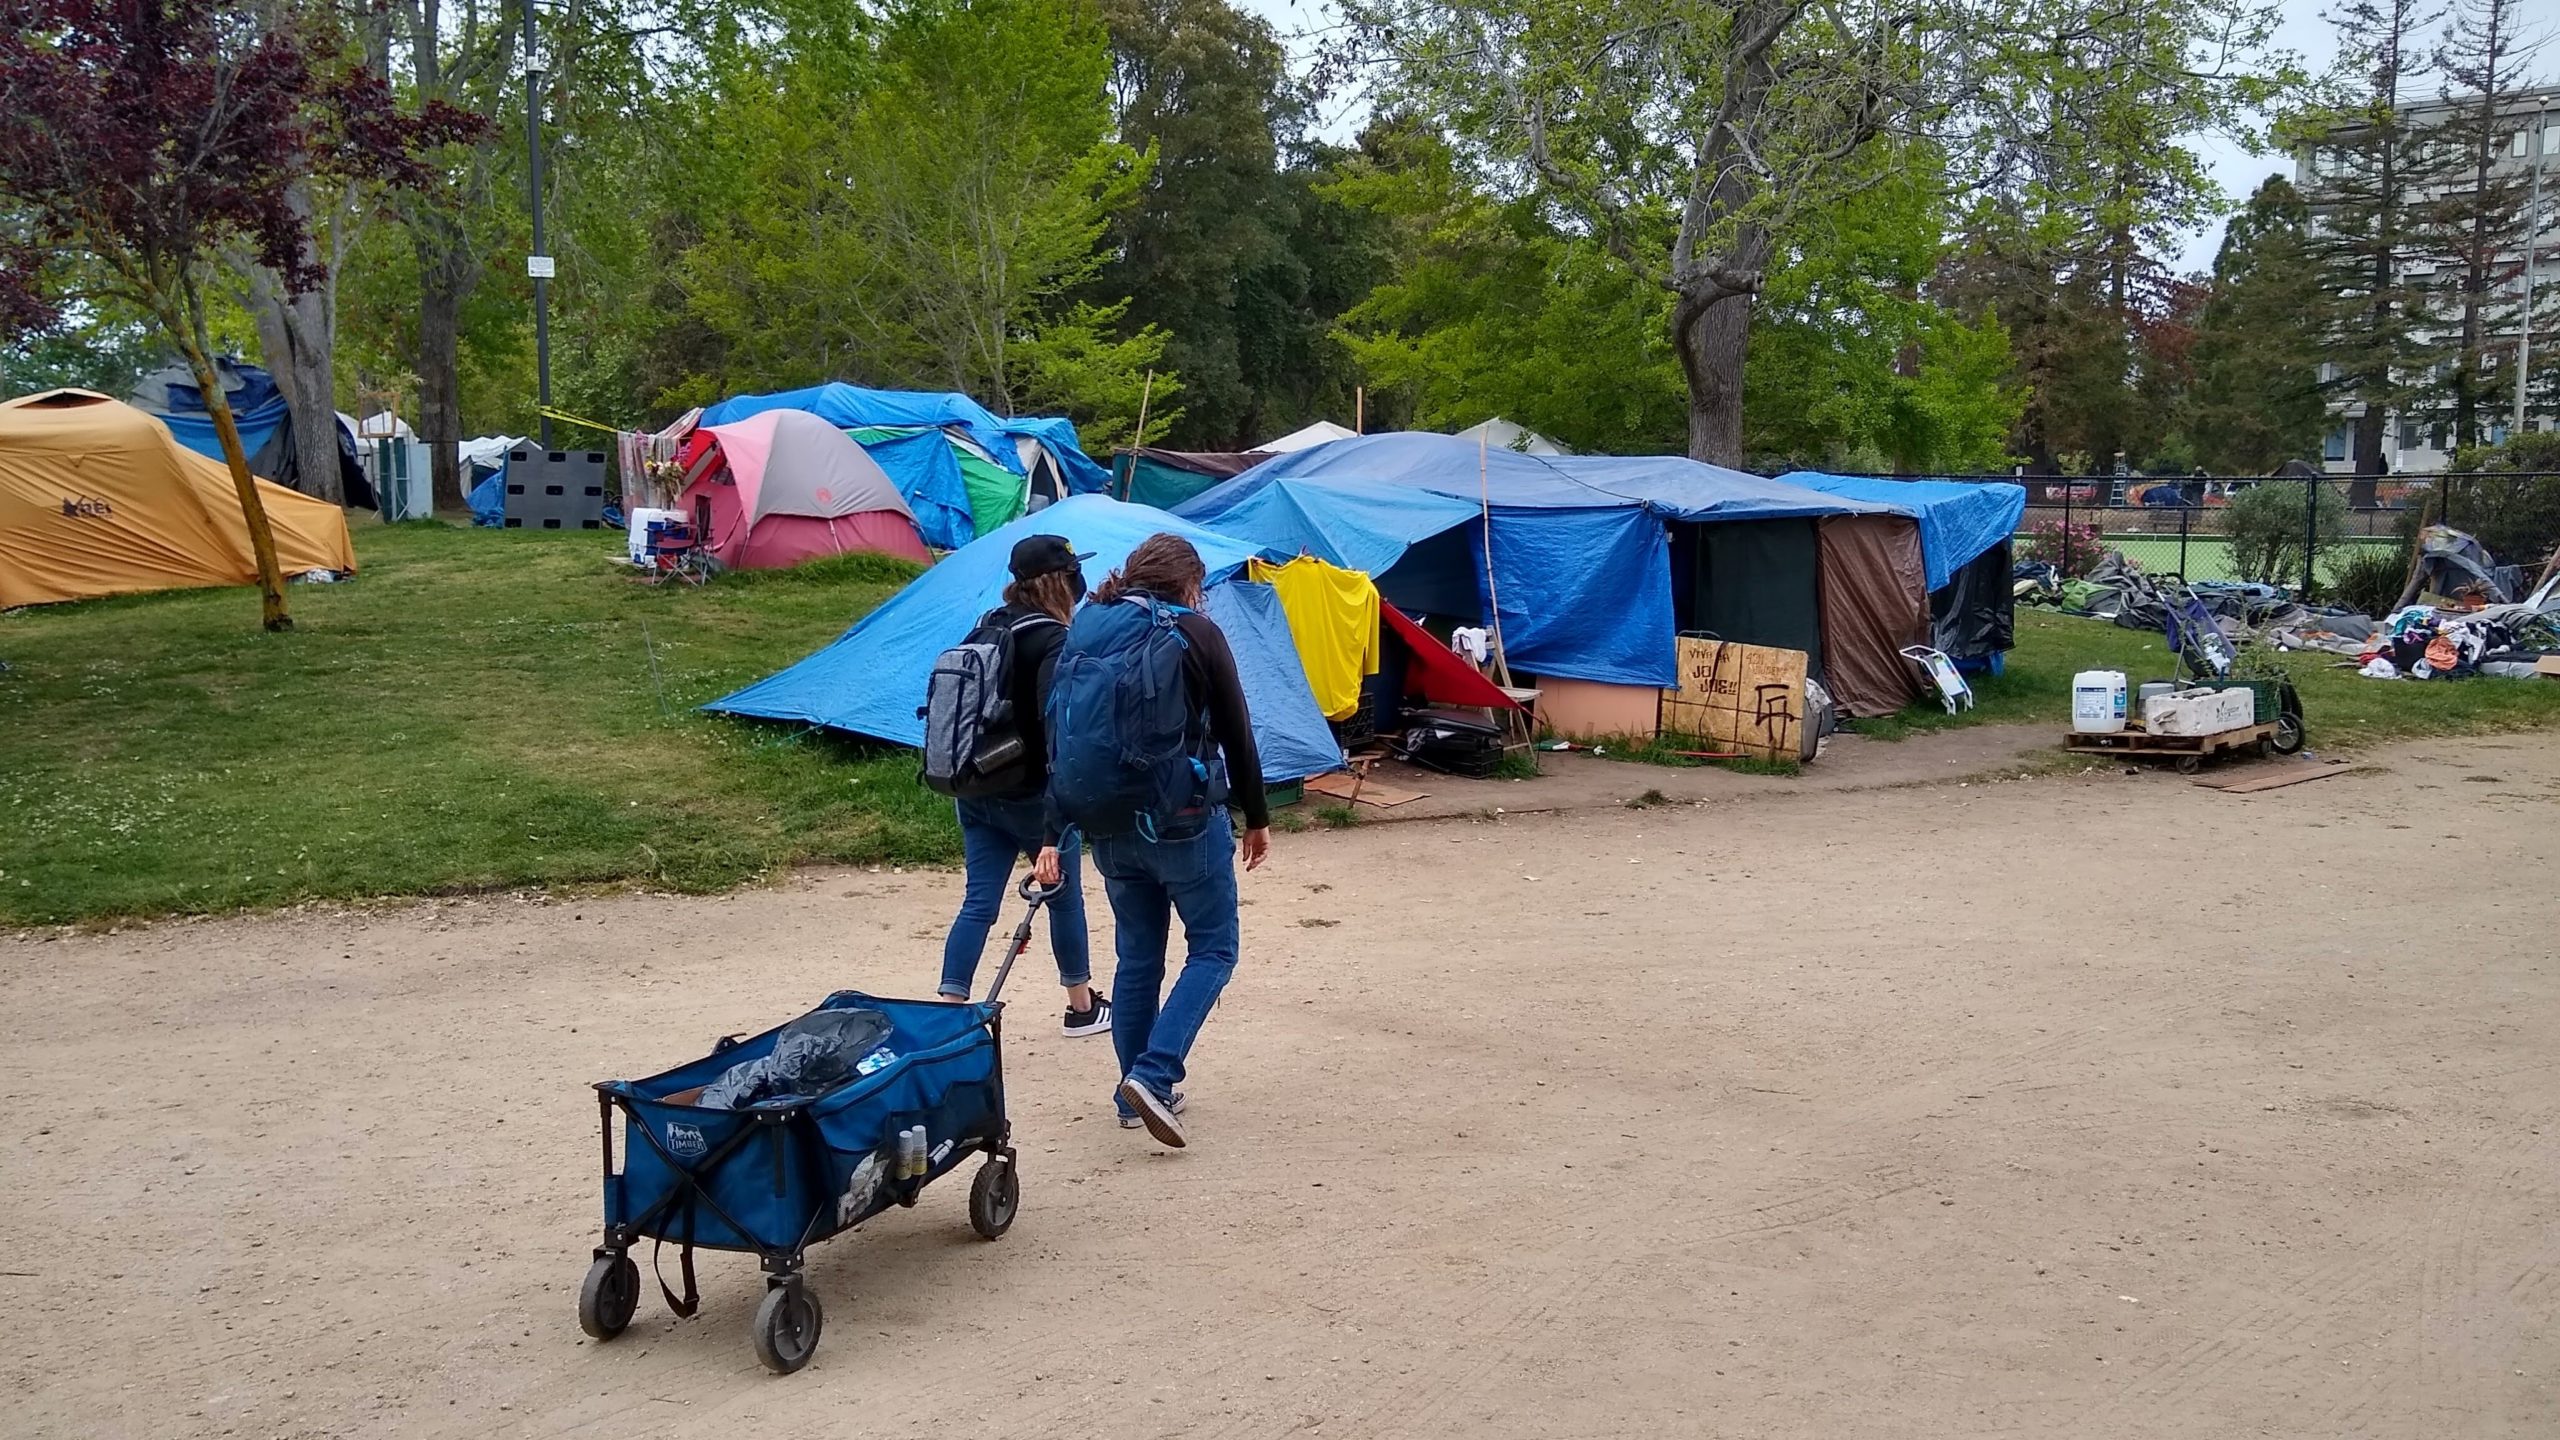 The Homeless Persons Health Project facilitates behavioral health services and provides water, first aid and other supplies at the benchlands near San Lorenzo Park in Santa Cruz in 2021. (Stephen Baxter — Santa Cruz Local file)